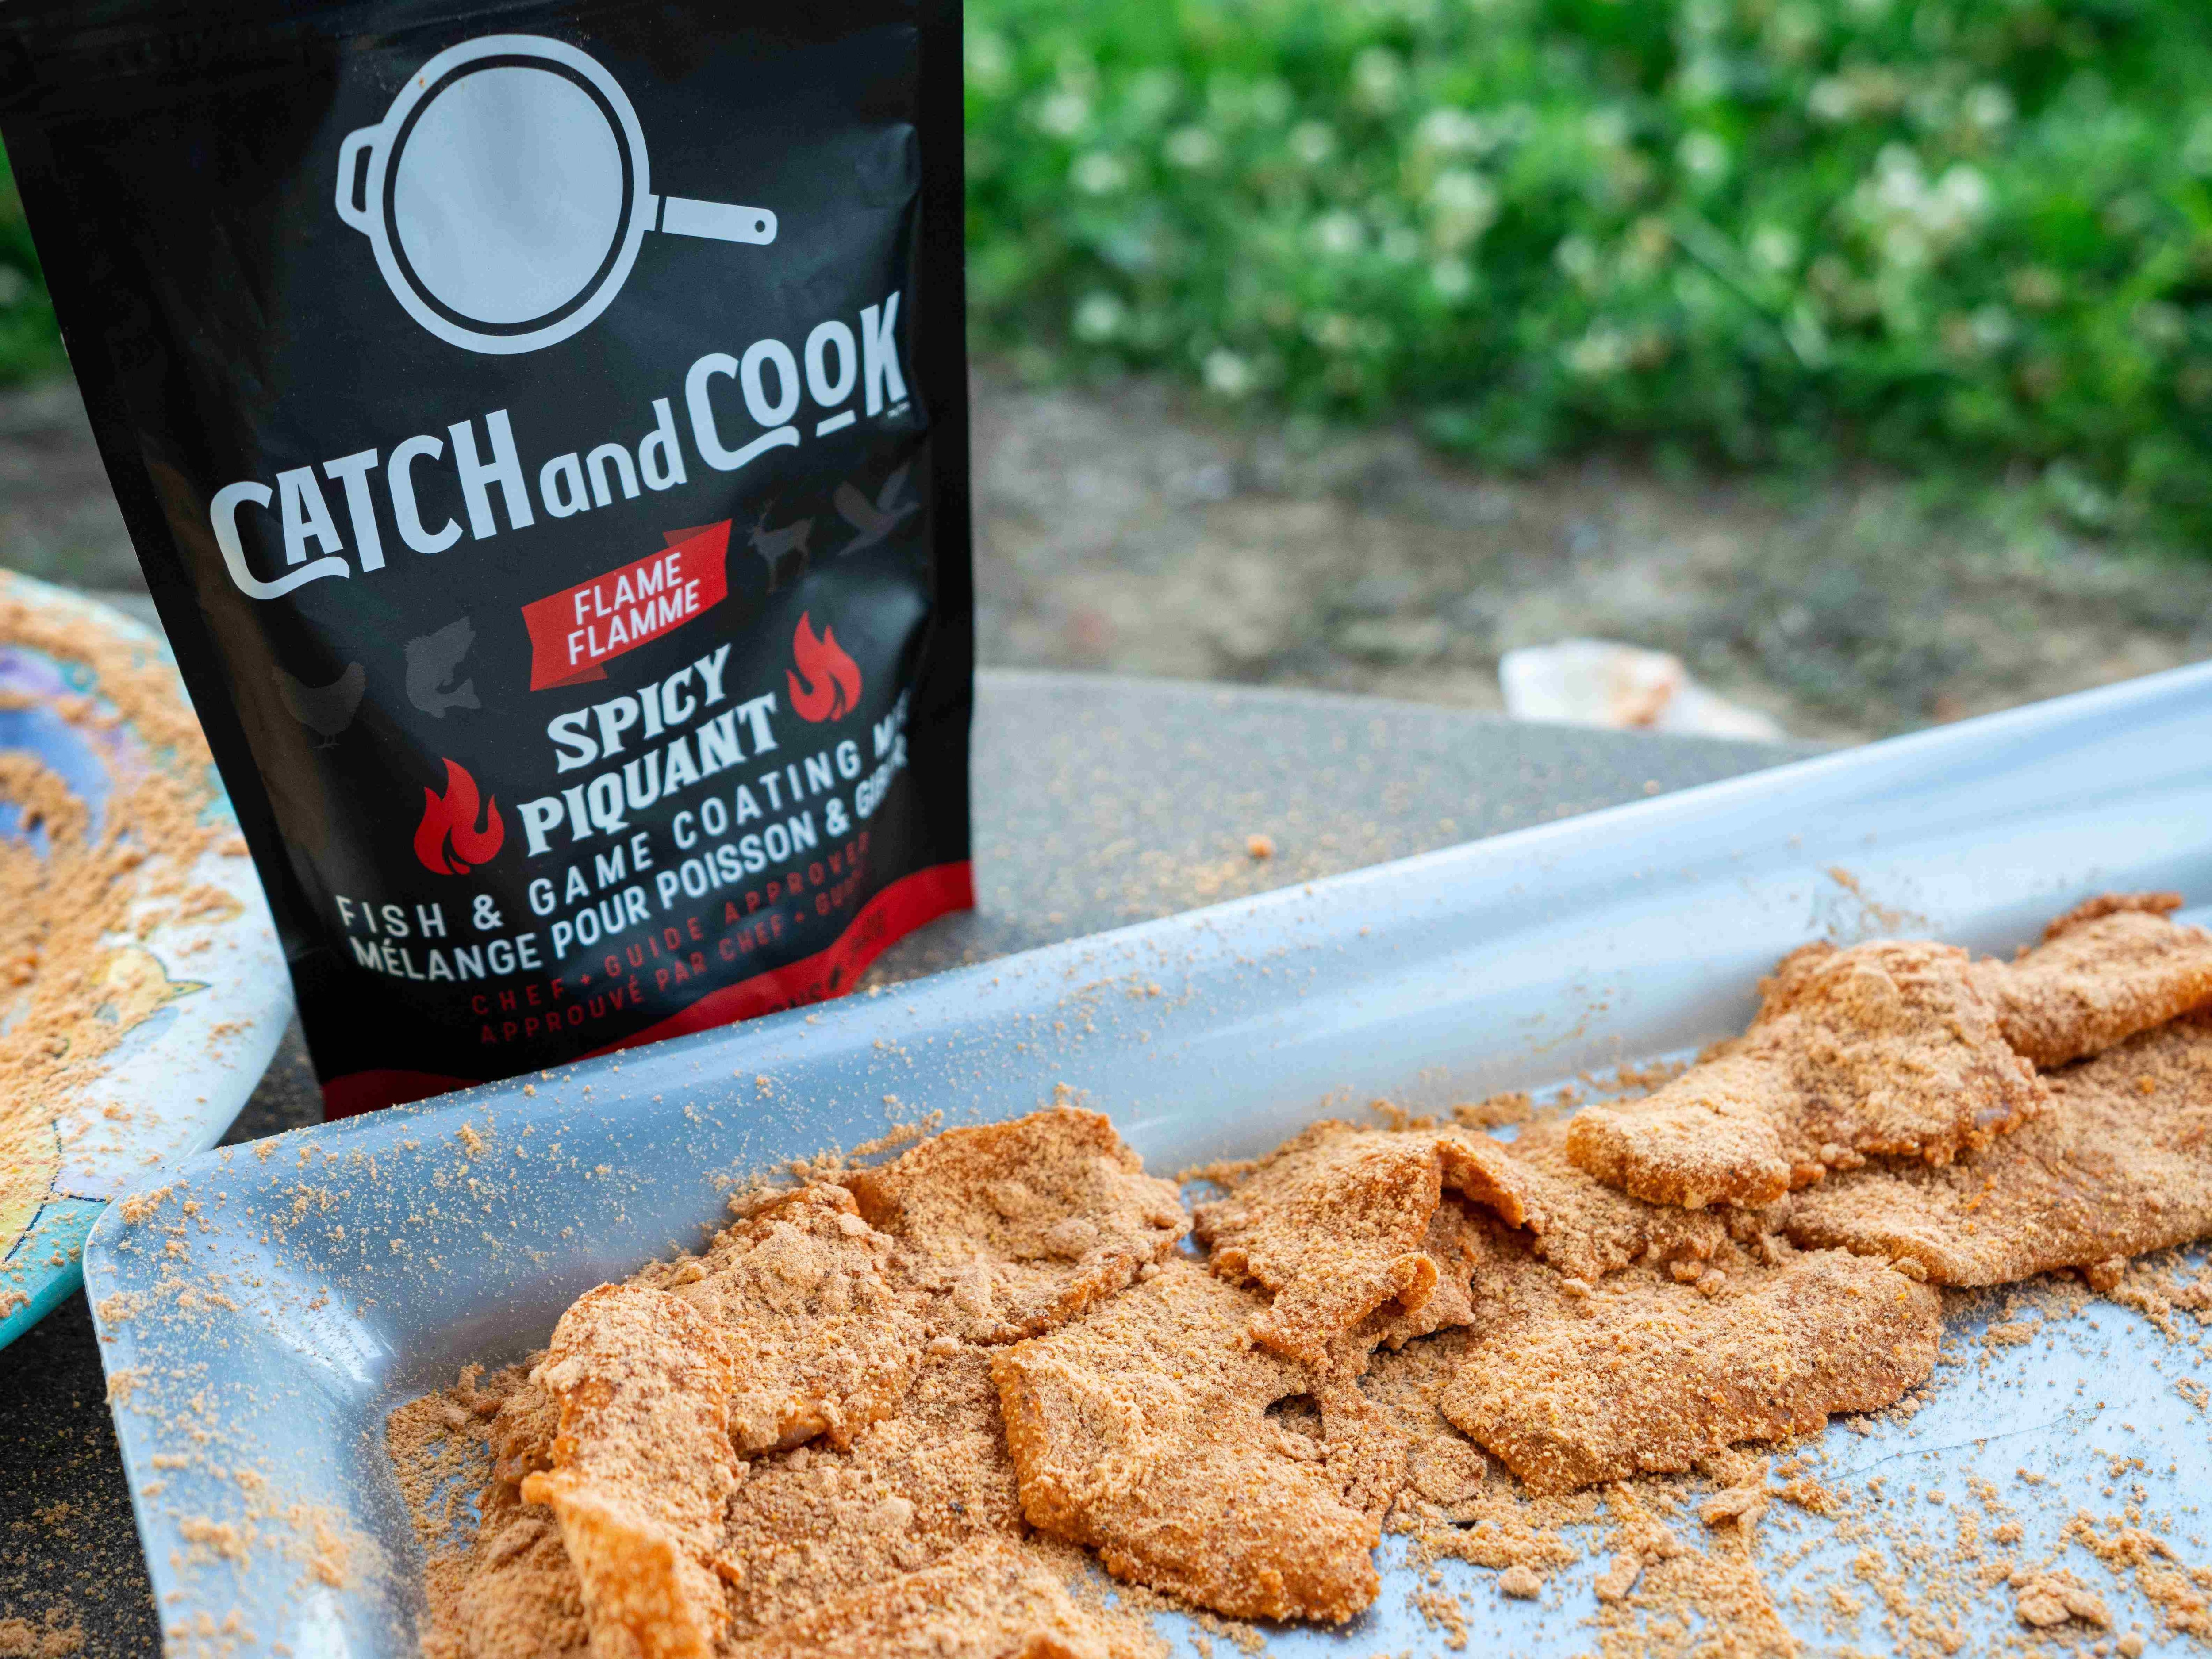 Catch and cook spicy piquant fish and game coating 